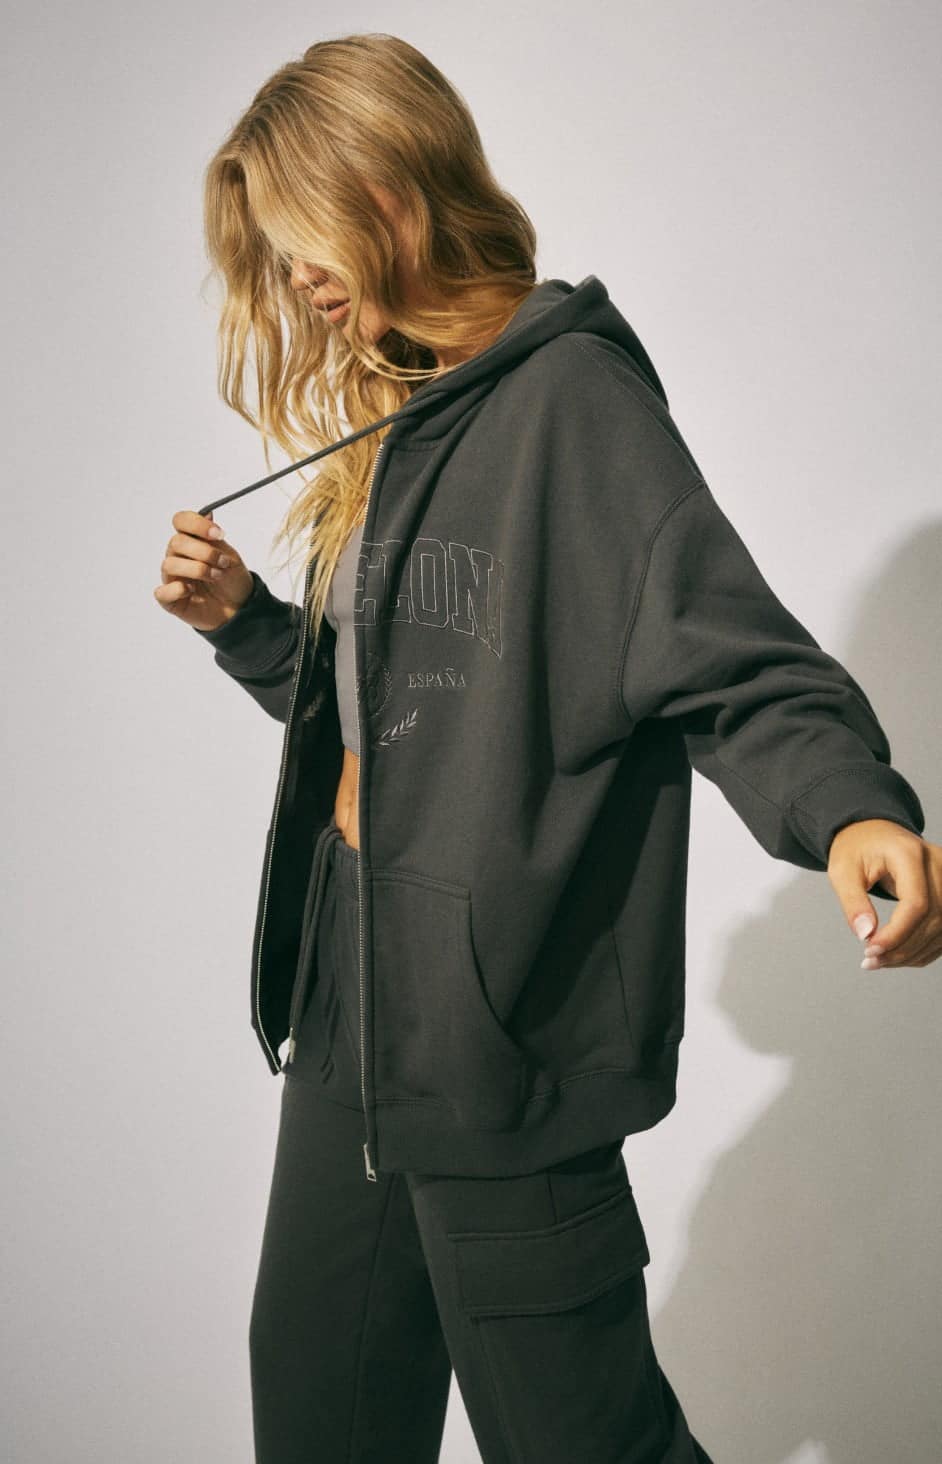 Model wears a hoodie with a grey tank top and black pants.